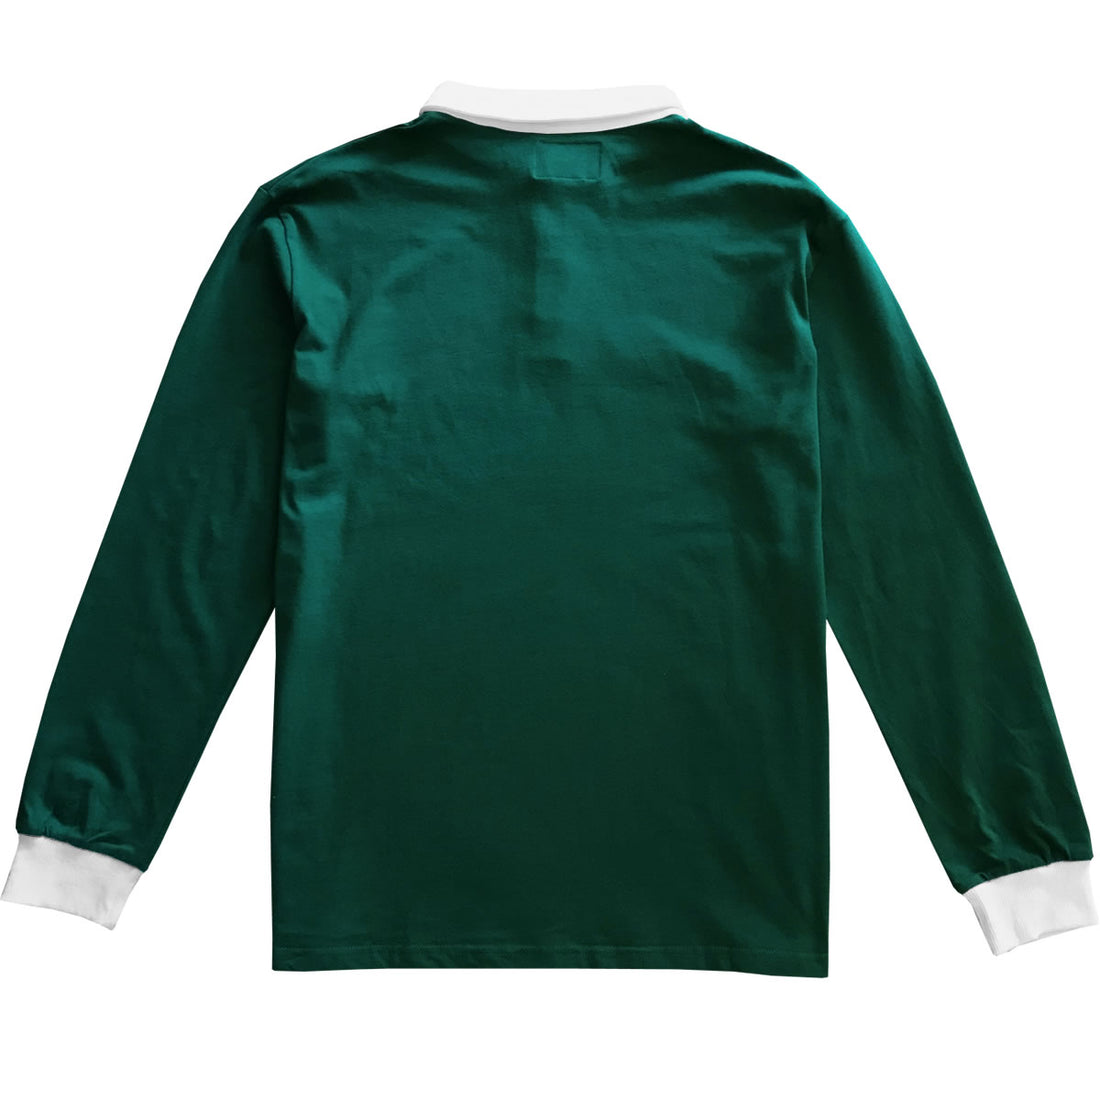 Solid Green with White Collar Mens Long Sleeve Polo Rugby Shirt